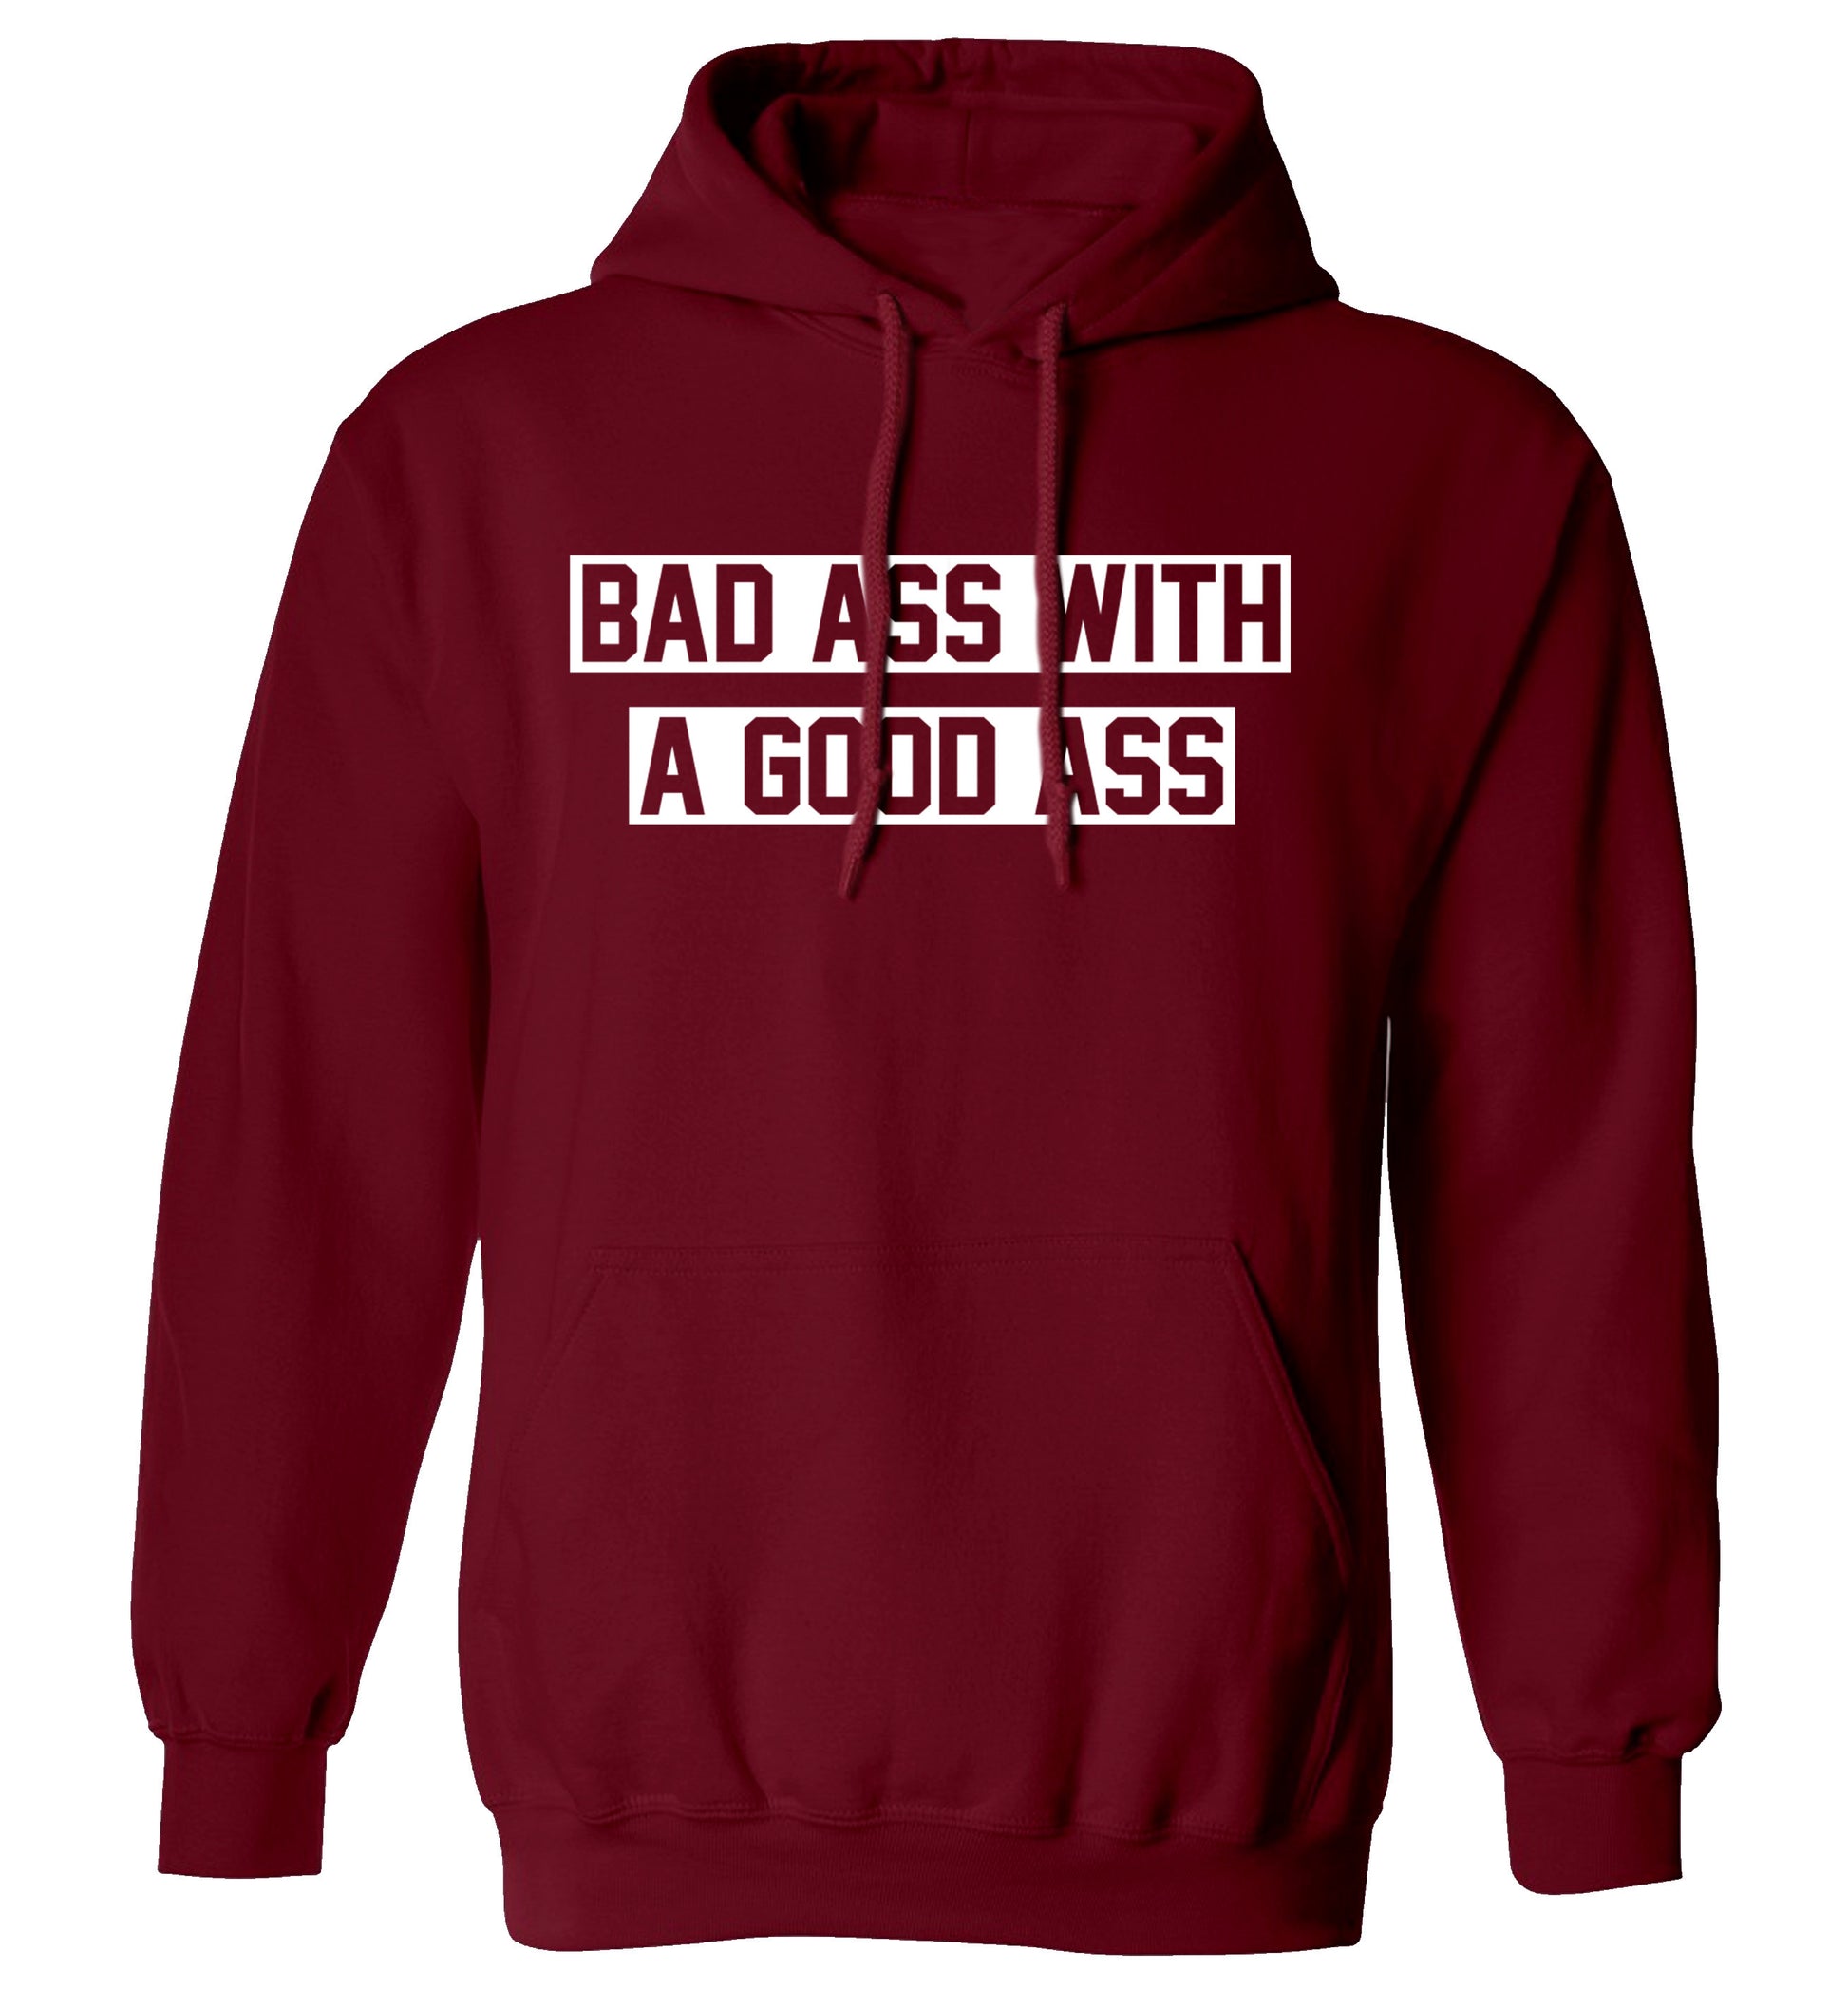 A bad ass with a good ass adults unisex maroon hoodie 2XL